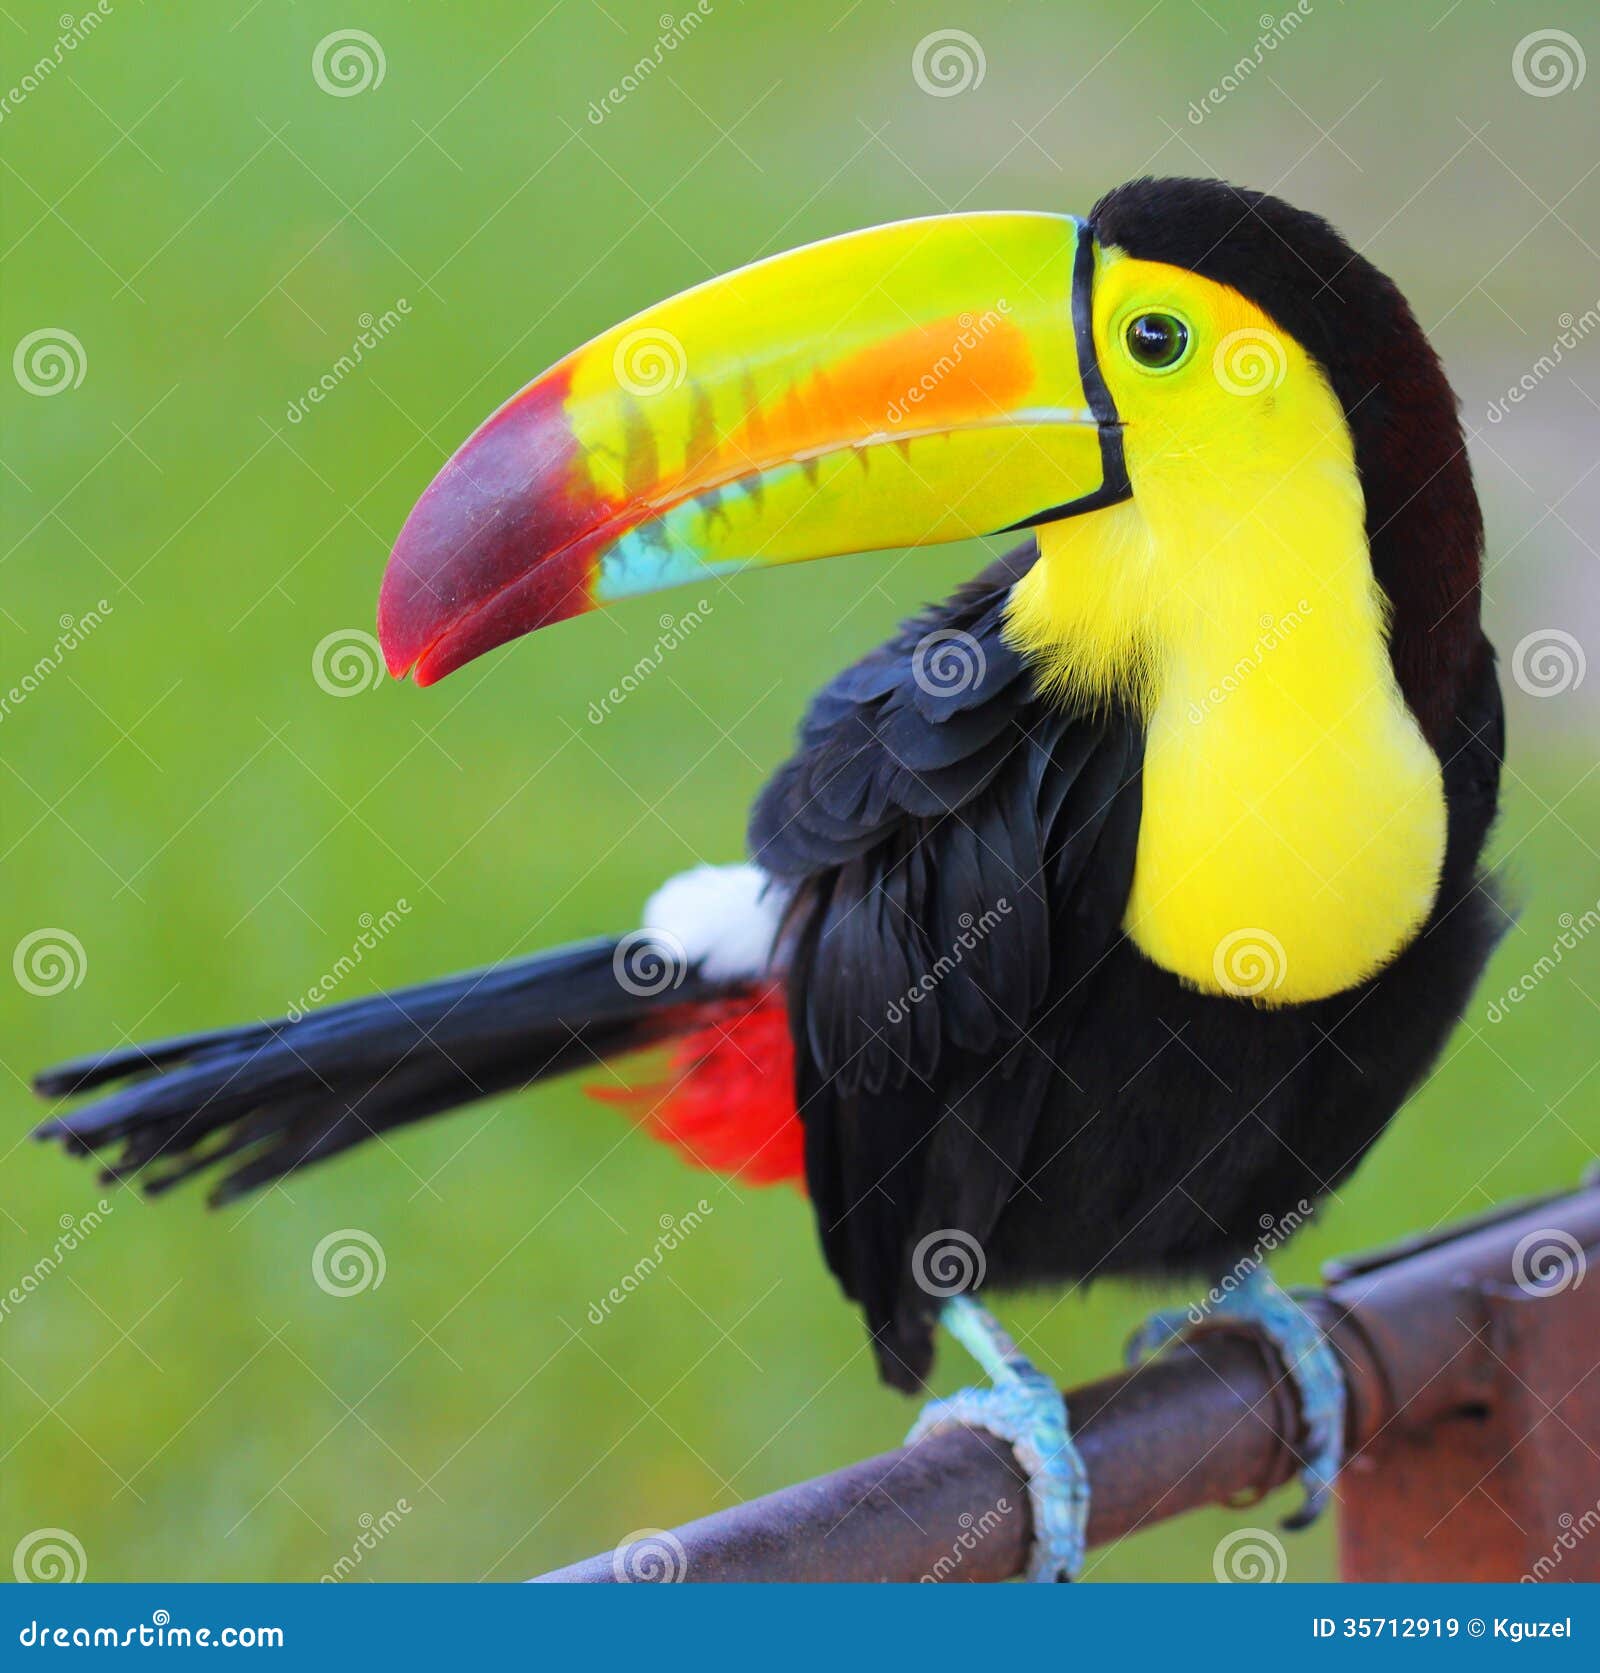 colored toucan. keel billed toucan